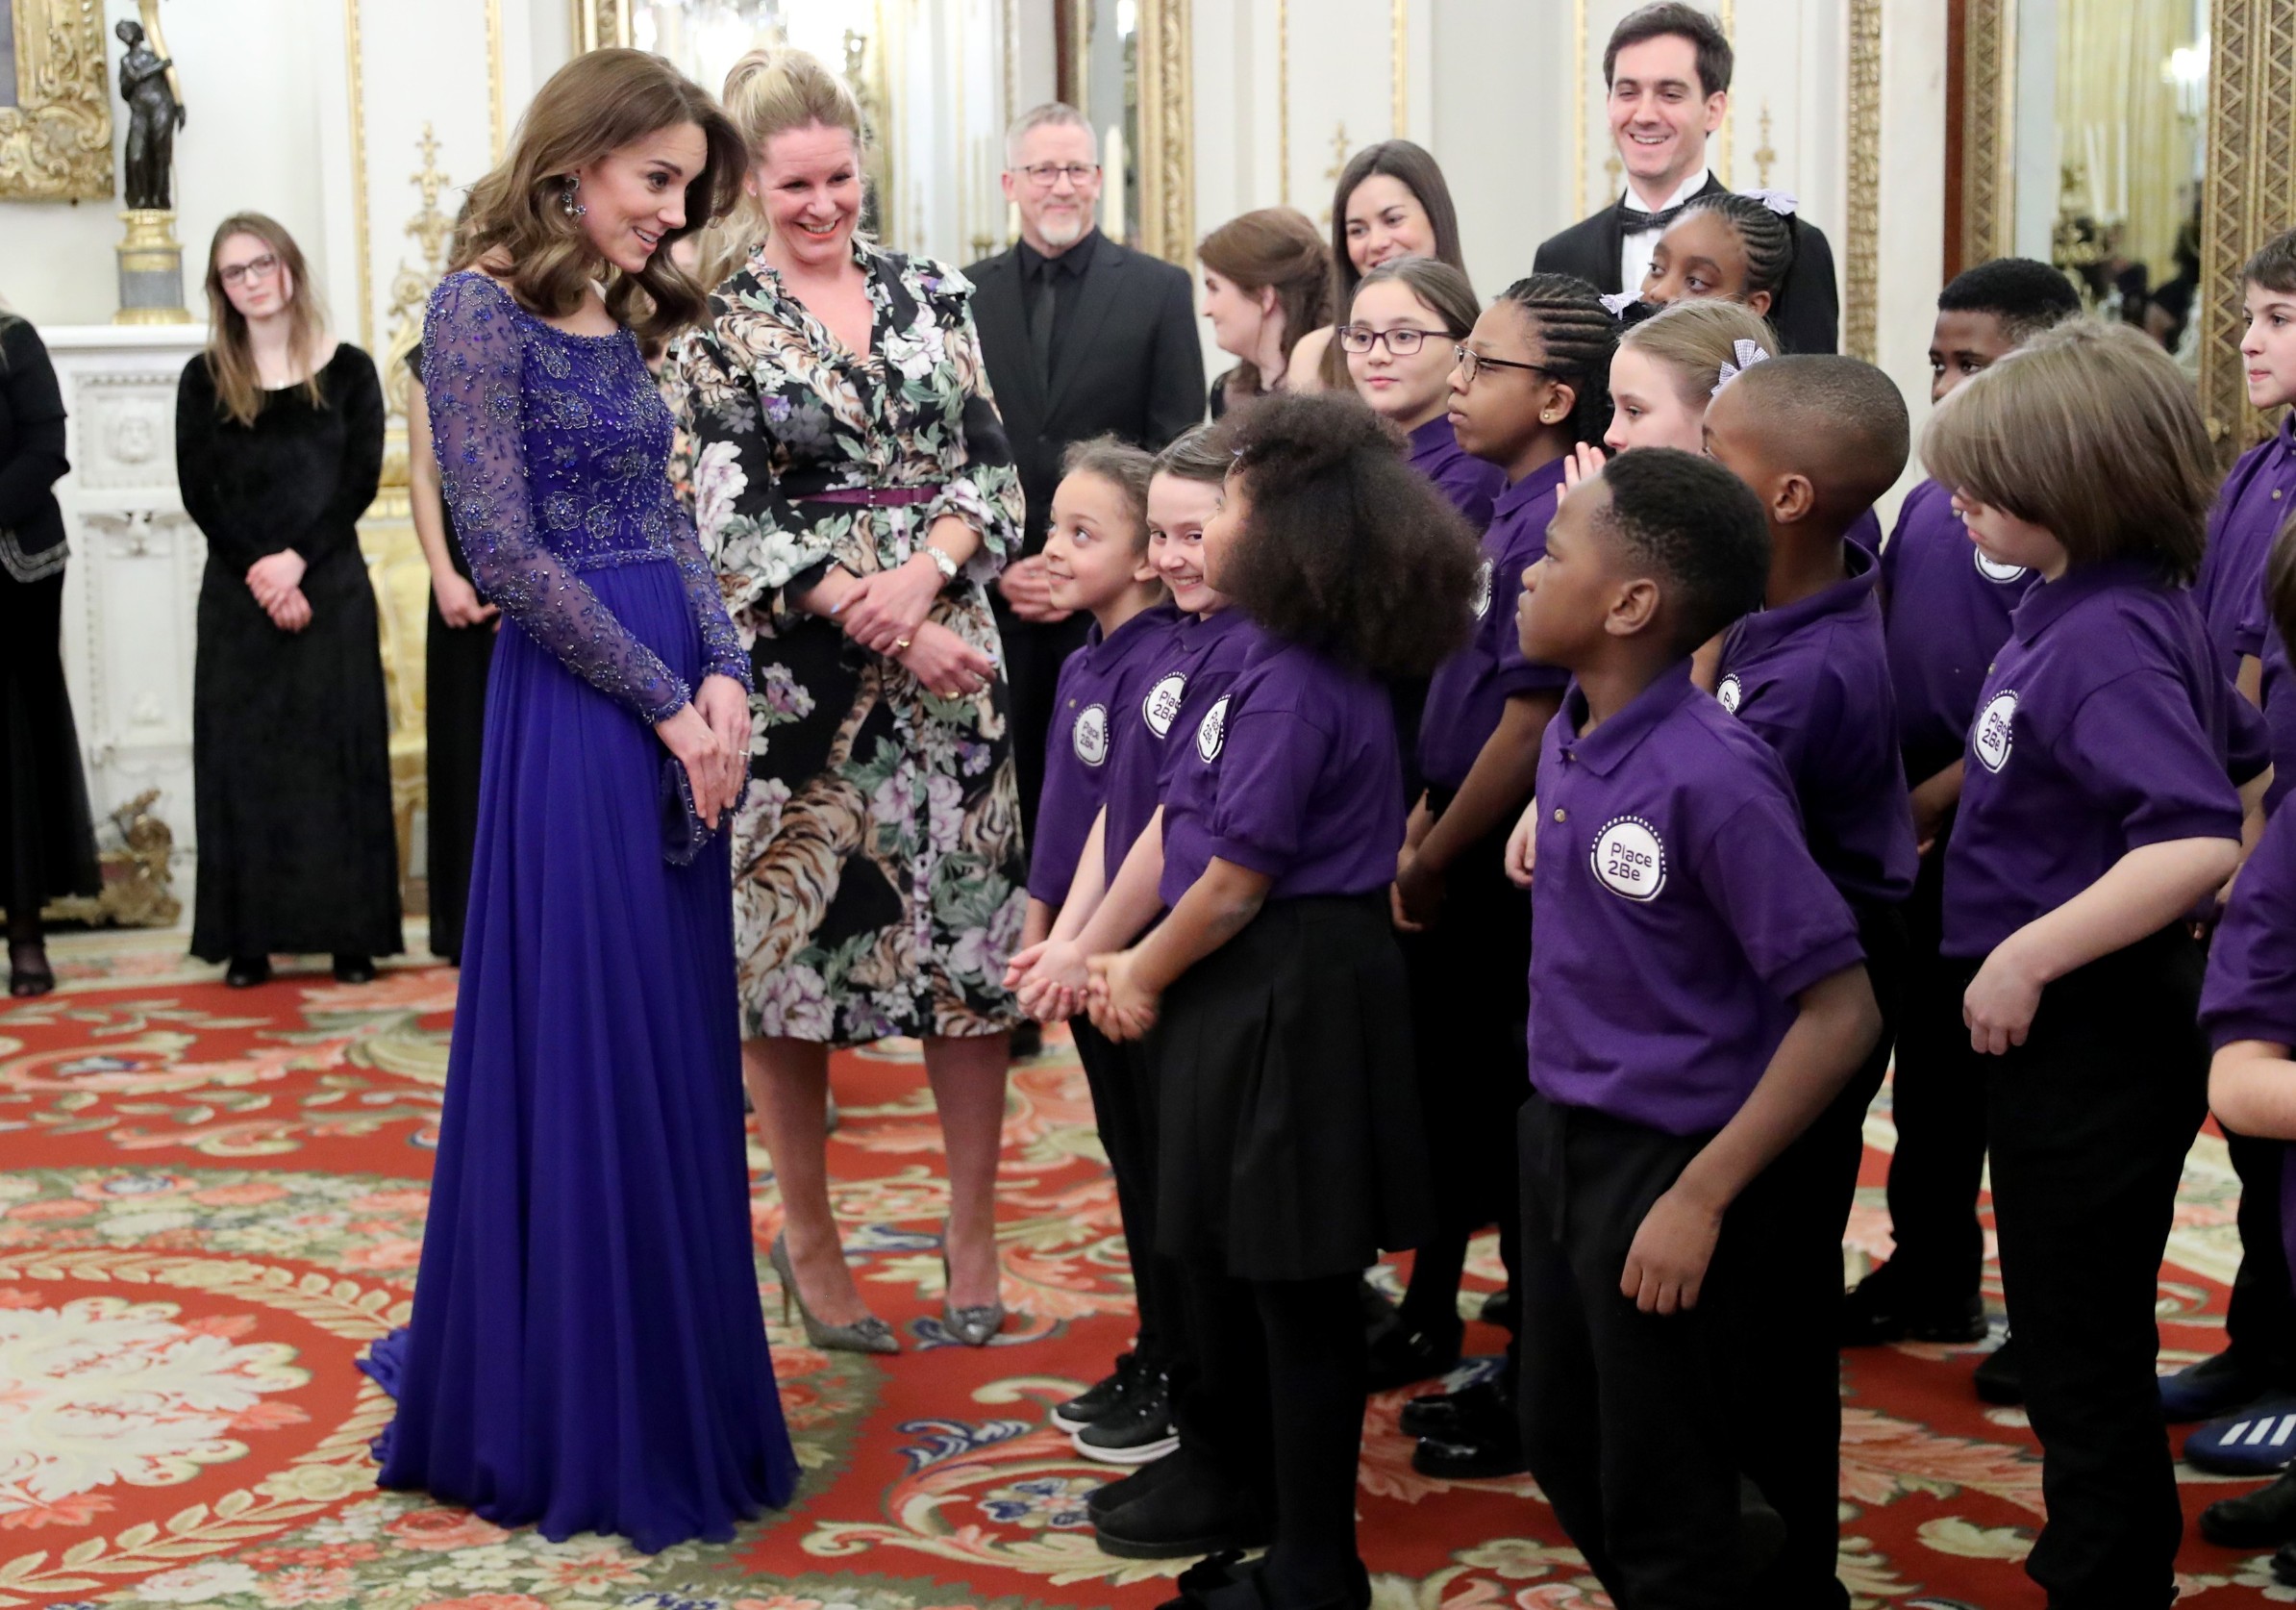 Catherine Duchess of Cambridge speaks with a school choir as she hosts a Gala Dinner in celebration of the 25th anniversary of Place2Be at Buckingham Palace.
Place2Be 25th Anniversary Gala Dinner, Buckingham Palace, London, UK - 09 Mar 2020
The Duchess is Patron of Place2Be, which provides emotional support at an early age and believes no child should face mental health difficulties alone., Image: 504944403, License: Rights-managed, Restrictions: , Model Release: no, Credit line: REX / Shutterstock Editorial / Profimedia